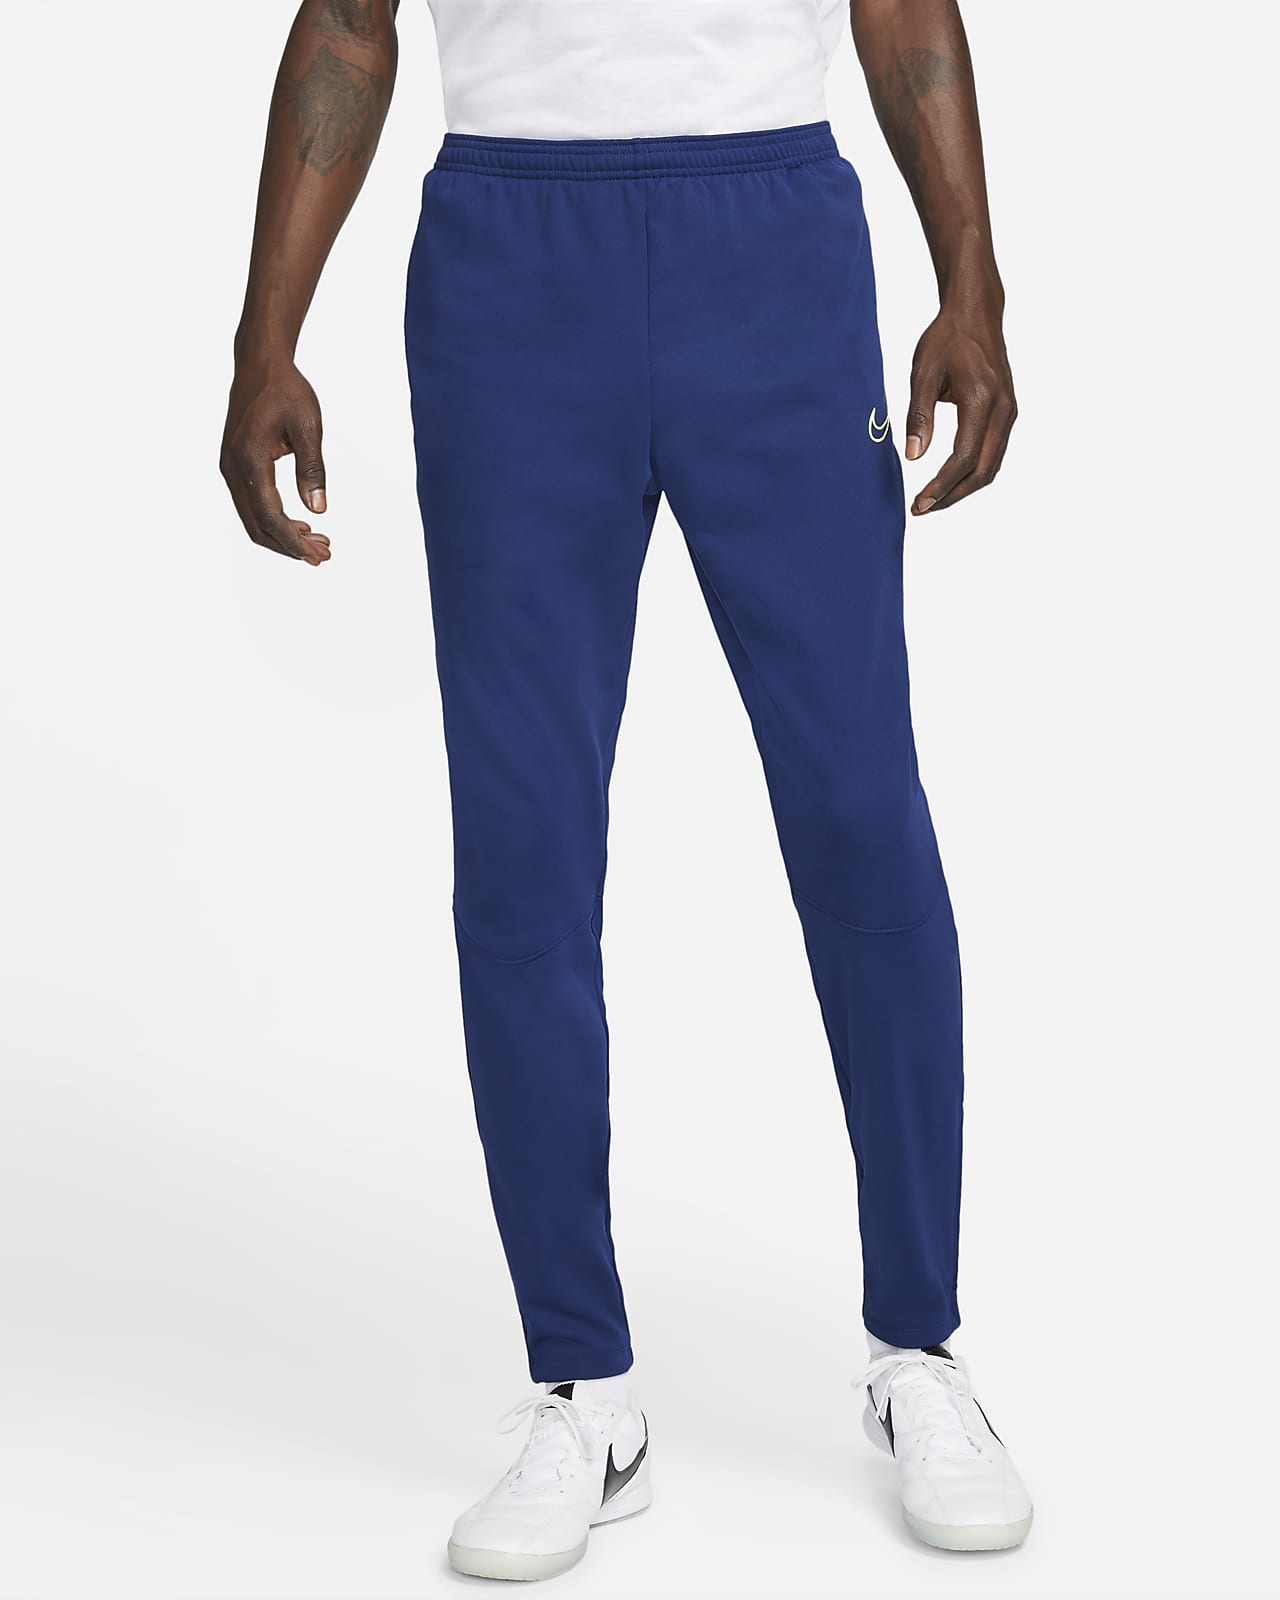 Nike Therma-Fit Academy Winter Warrior Men's Knit Football Pants